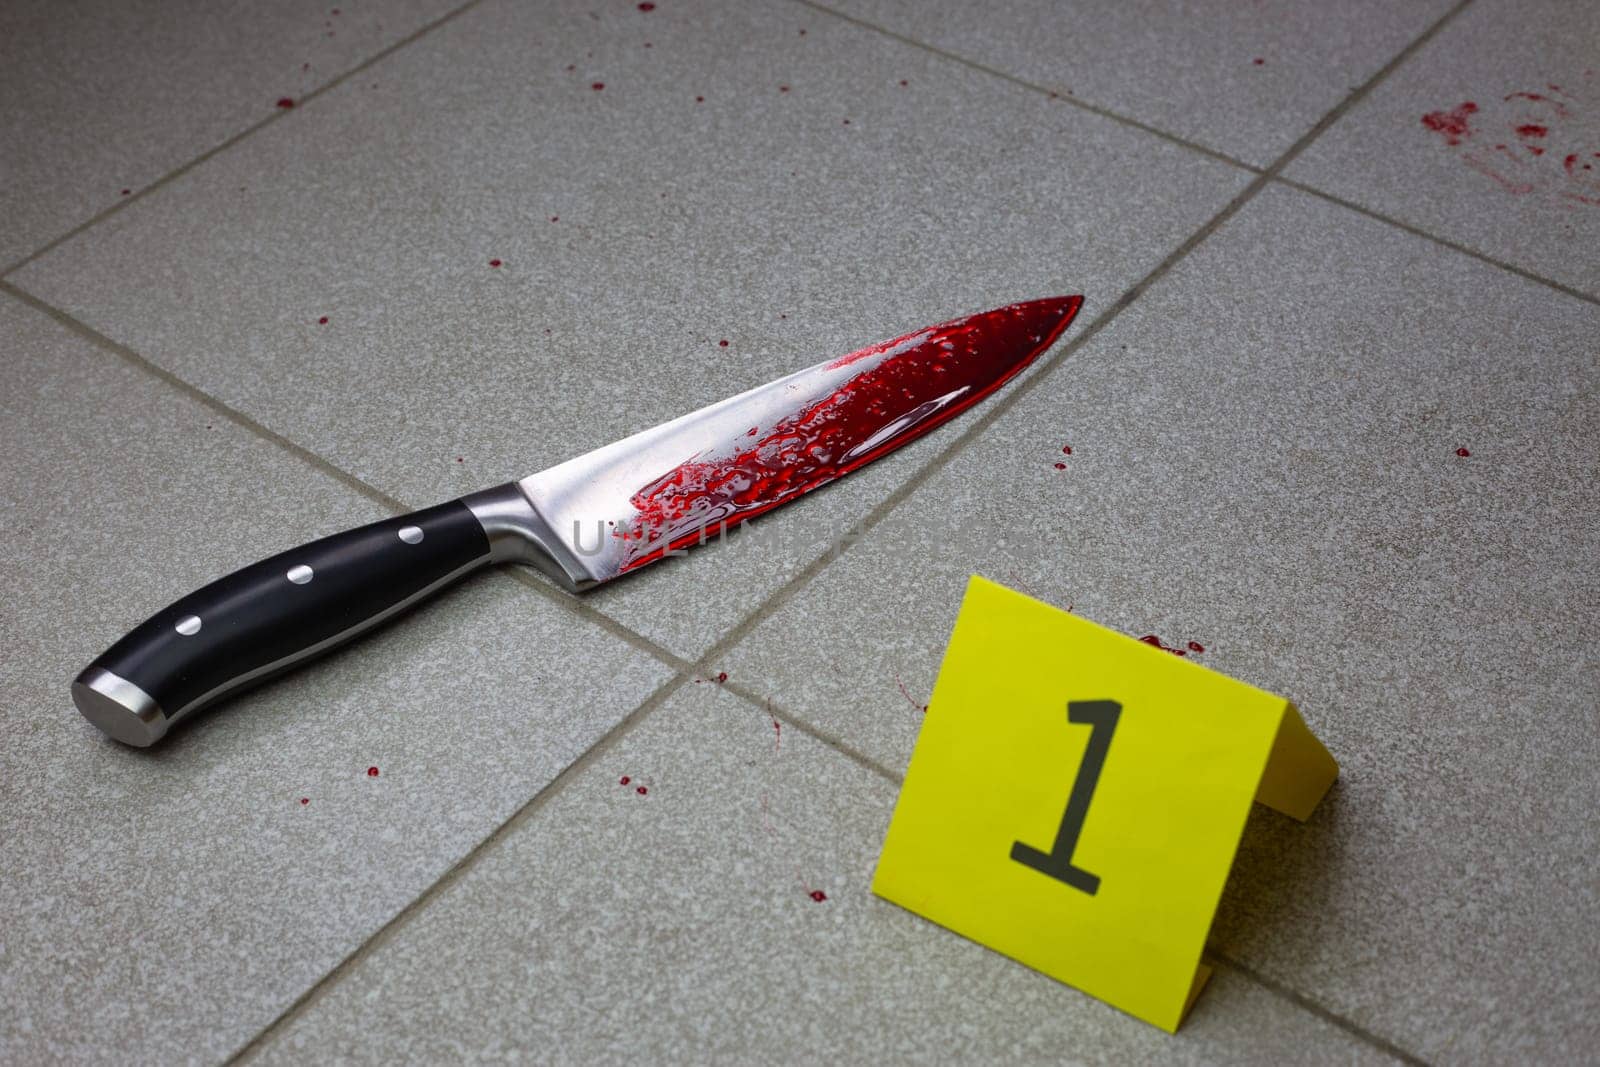 Knife covered in blood at the crime scene by timurmalazoniia